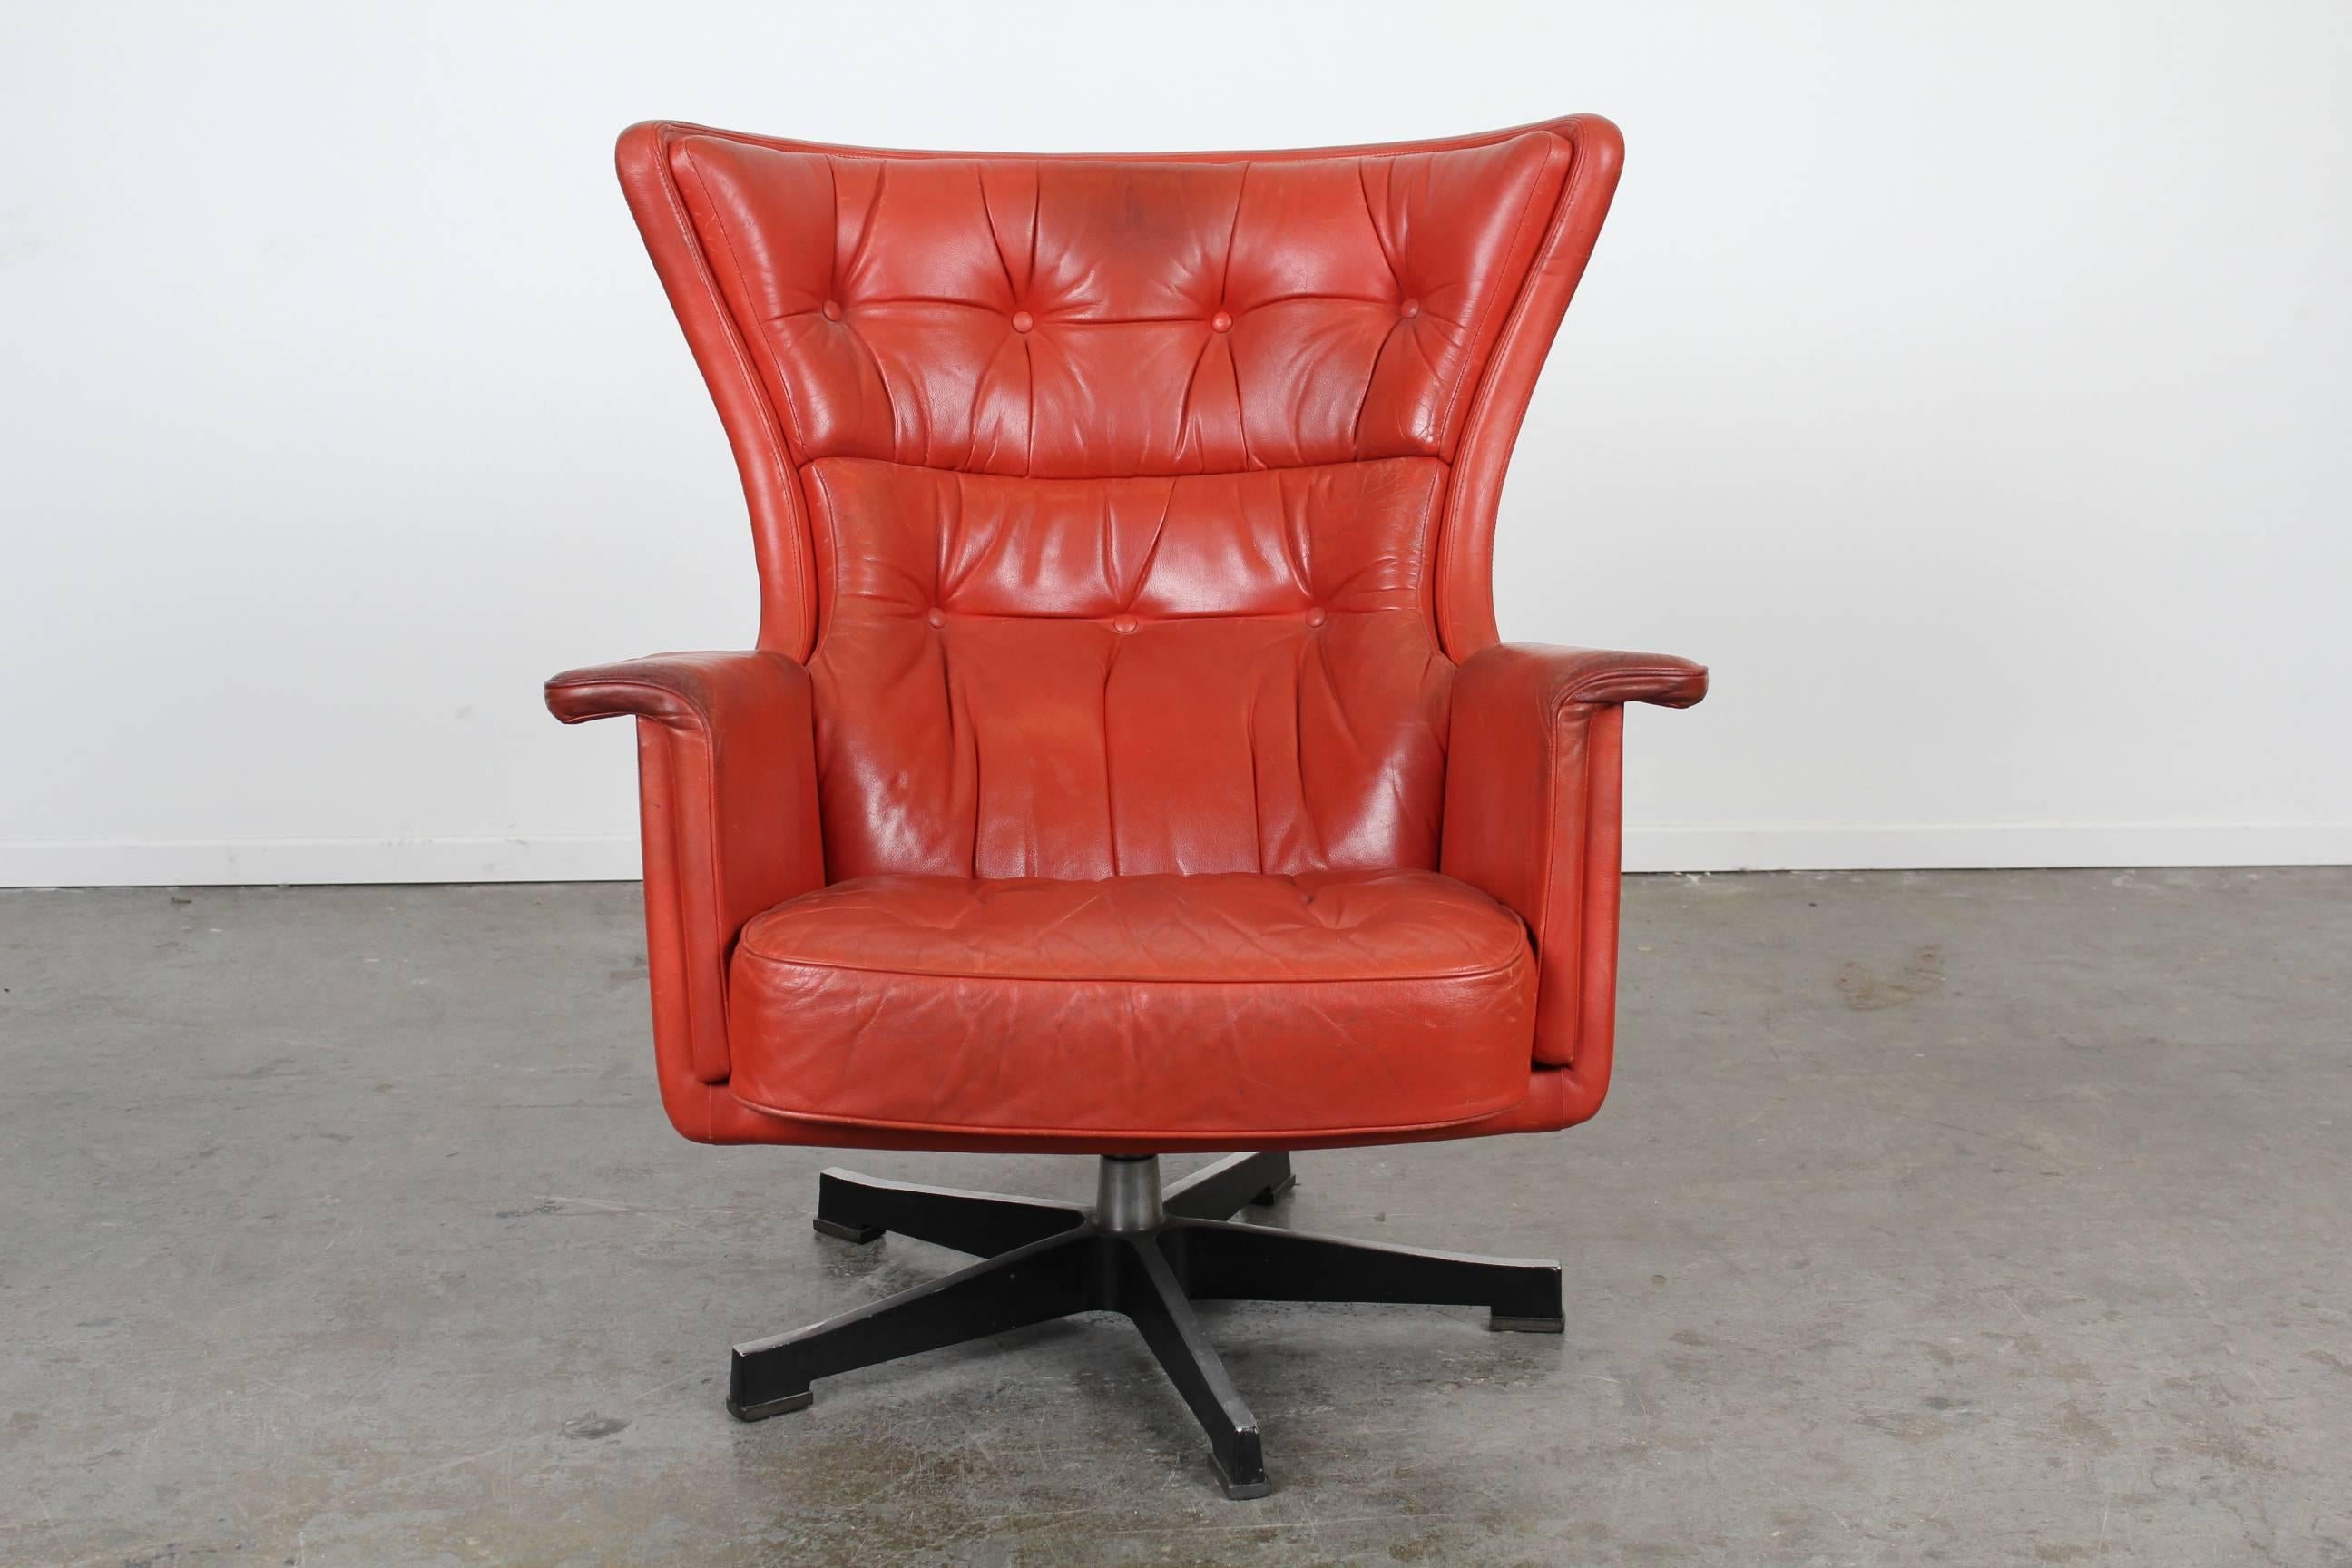 Vintage red leather swivel lounge chair with ottoman, designed by Karl Erik Ekselius. Matching pair available.